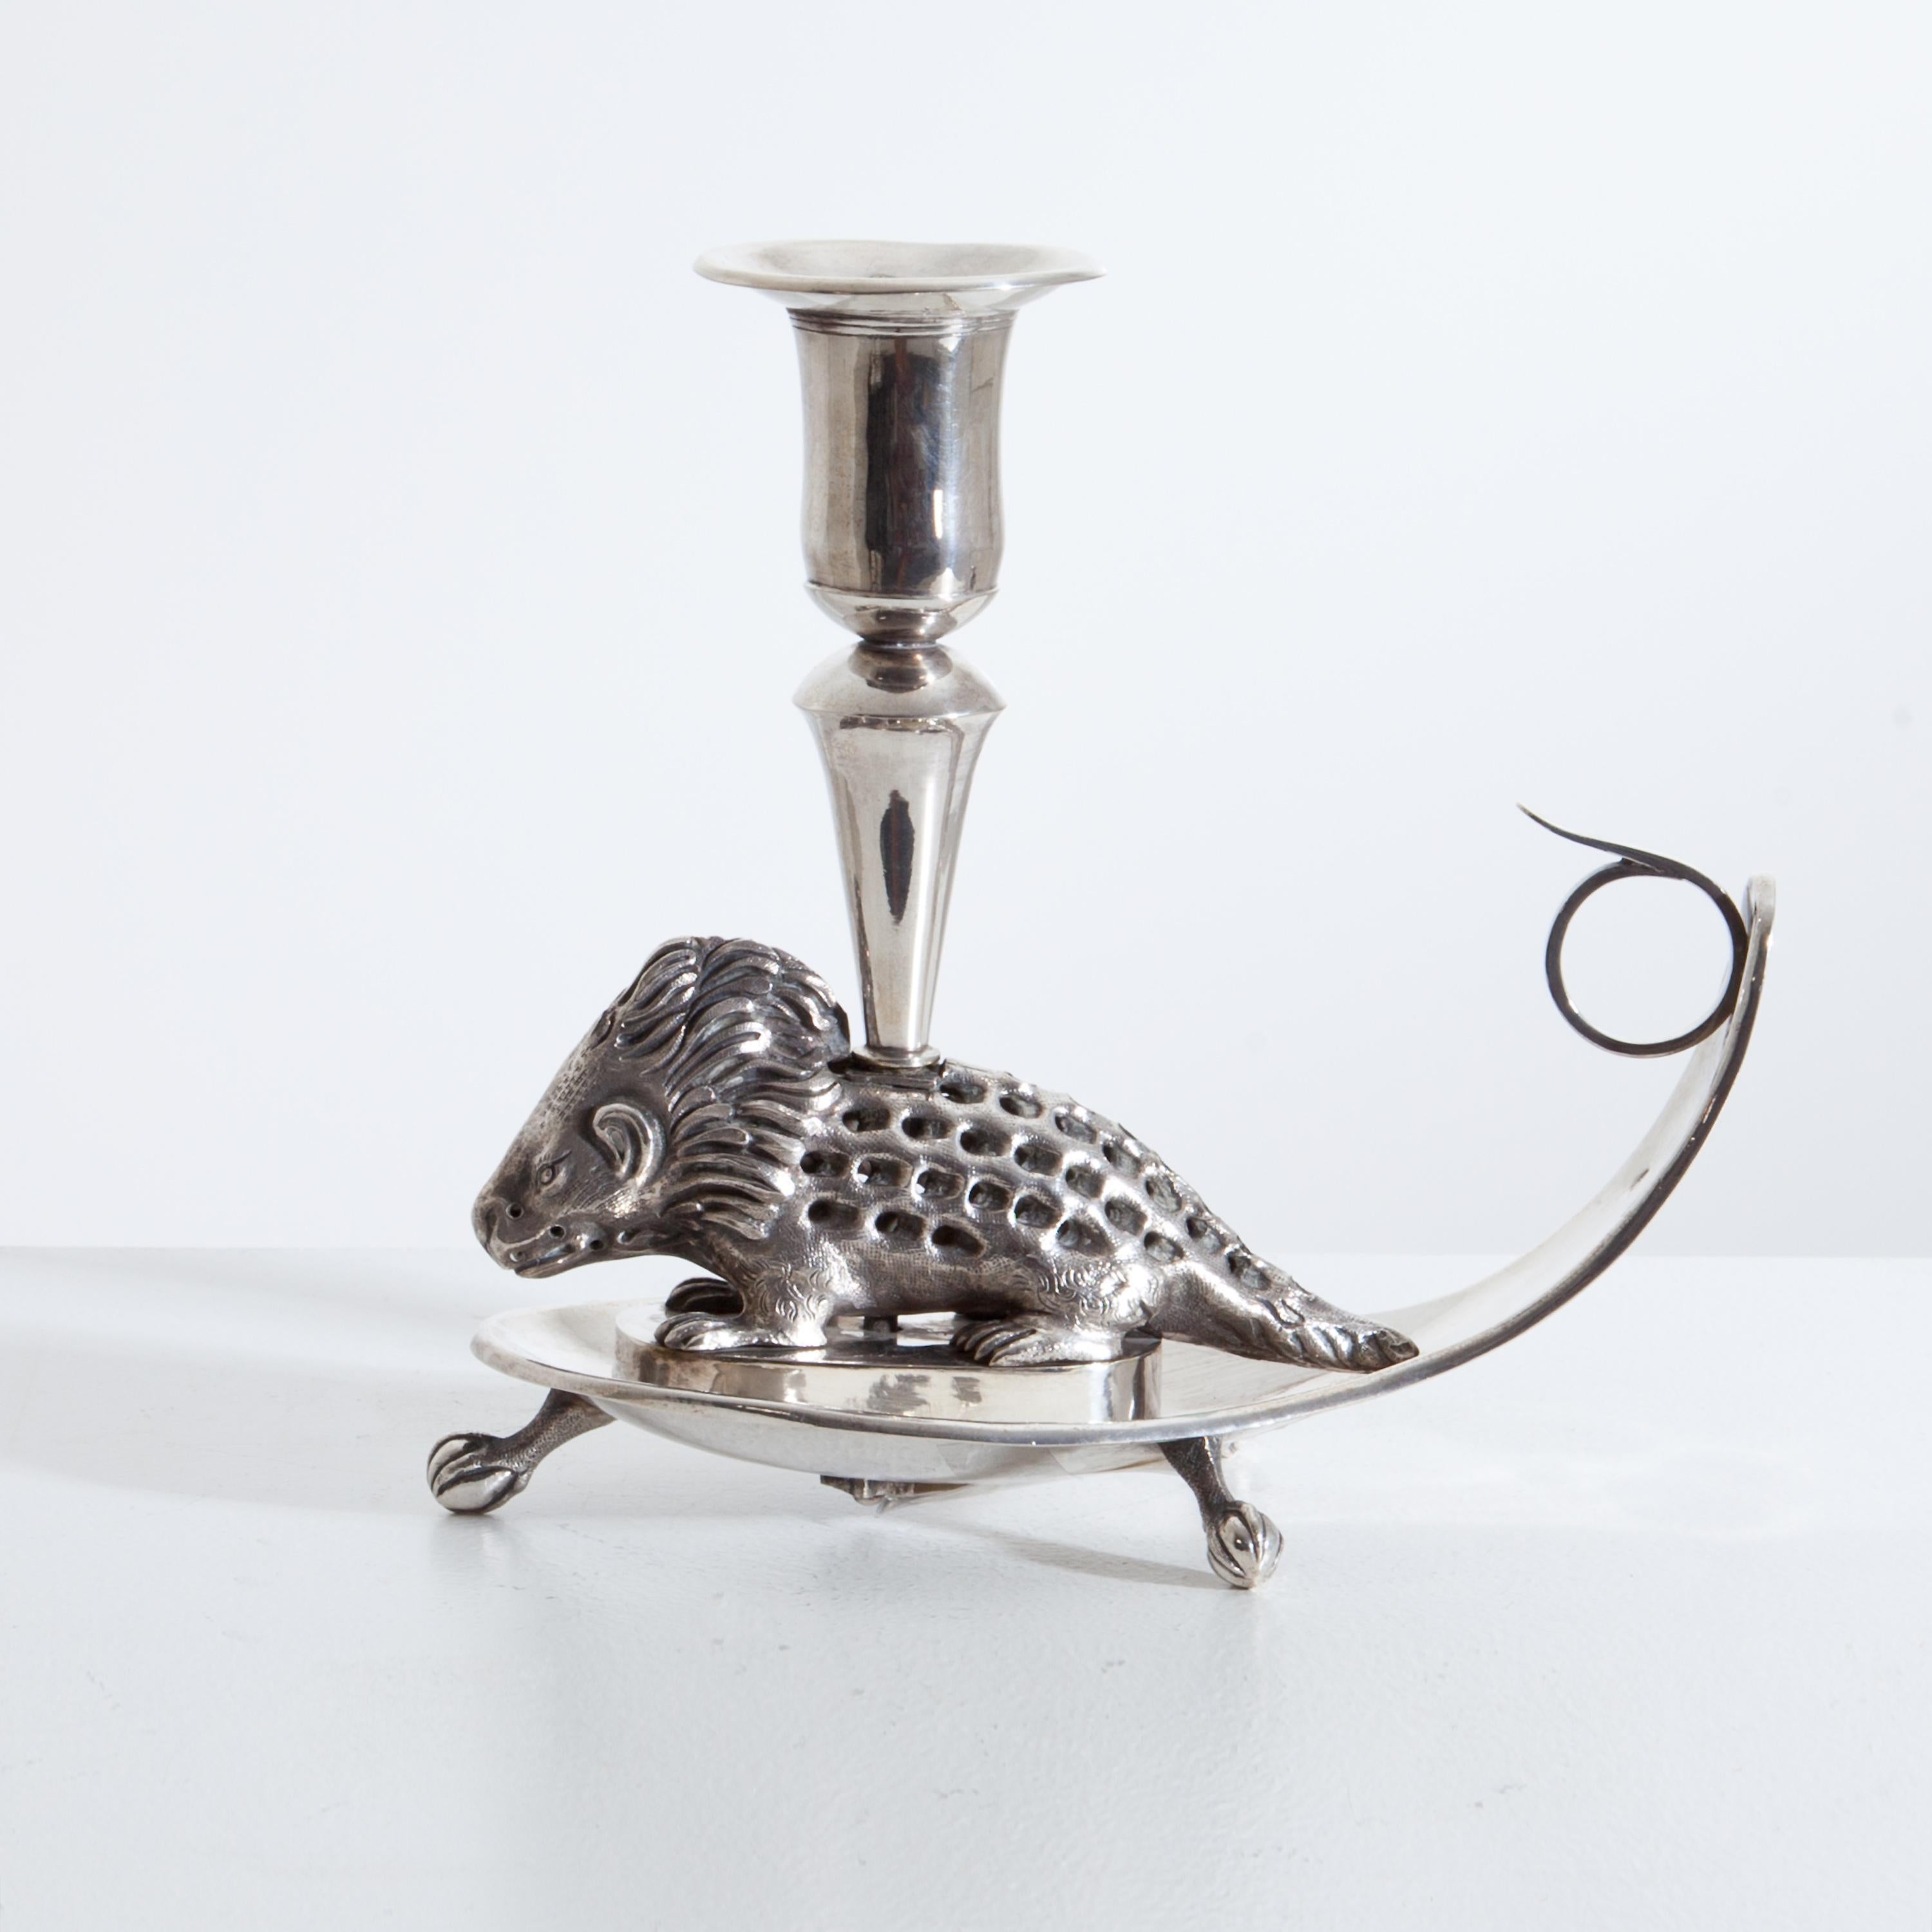 Toothpick holder in the shape of a porcupine with a candleholder on the back. Hallmarked Johann Alois Seethaler, Augsburg, 1810-1811.